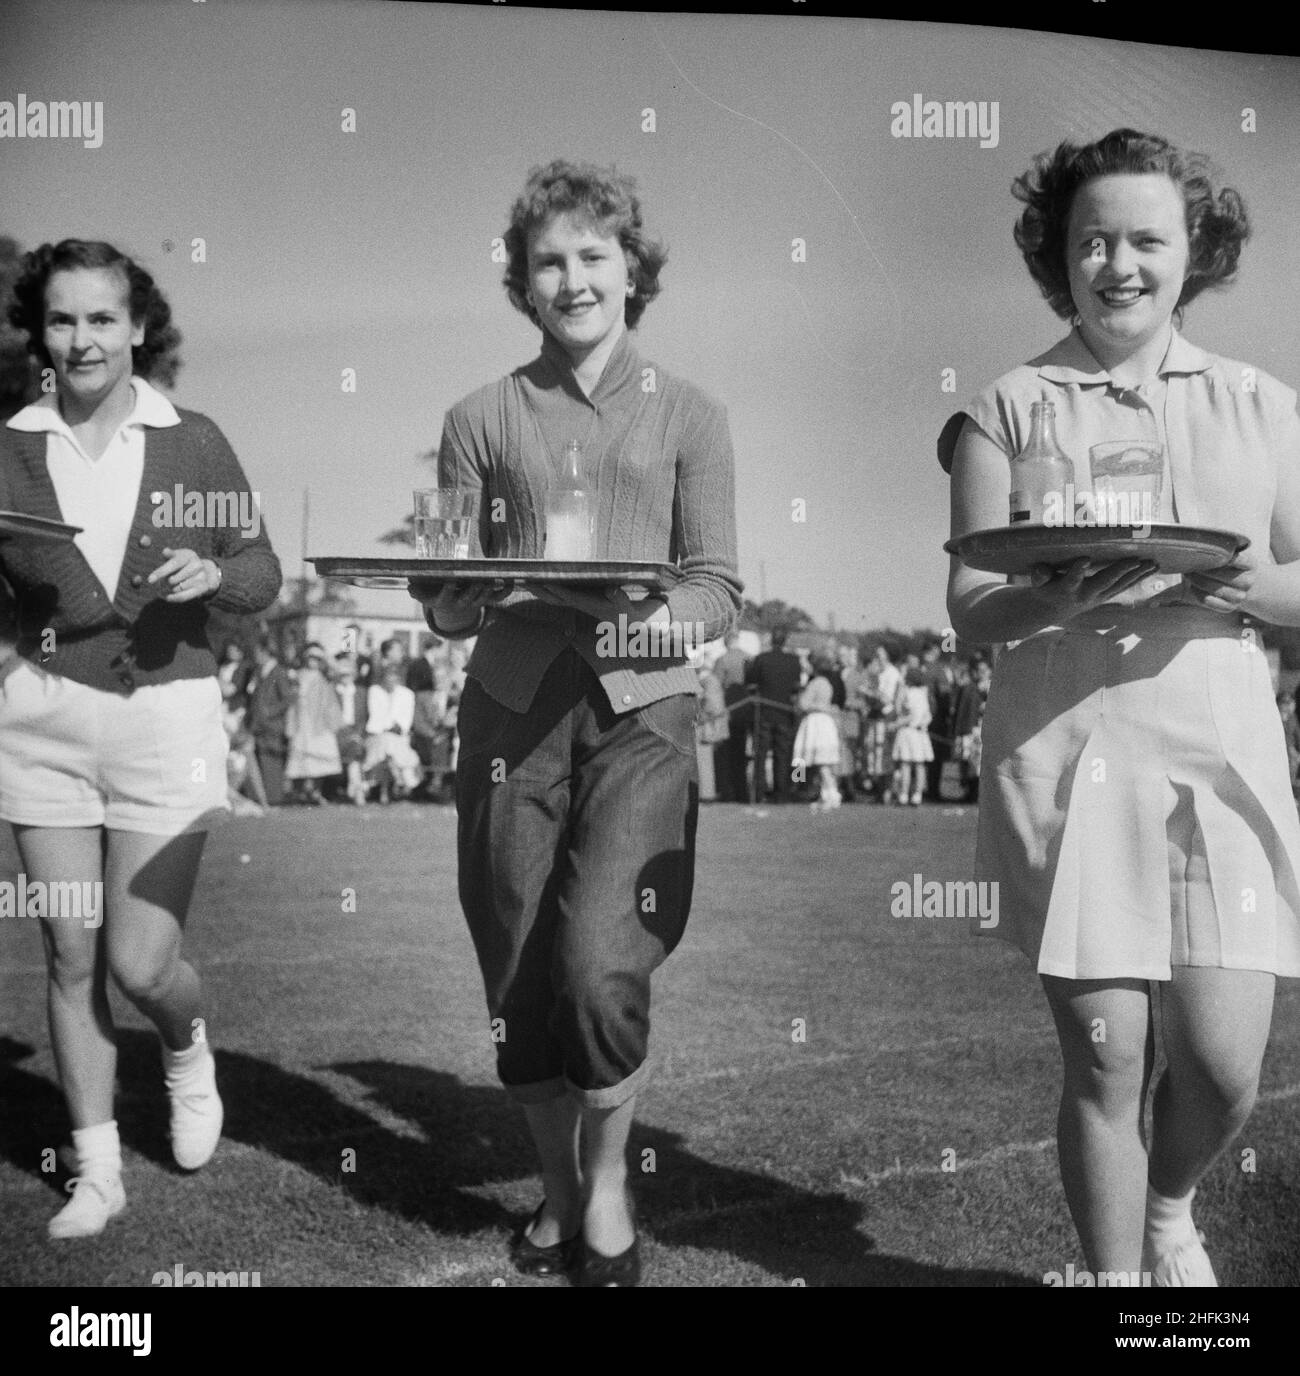 Laing Sports Ground, Rowley Lane, Elstree, Barnet, London, 18/06/1955. Three women with trays of refreshments competing in a waitressing race during a Laing sports day at Elstree. This sports day was attended by people from Laing contracts in Thurleigh, Bradford, Harlow, Shell Haven, London, Welwyn Garden City, Leicester and even as far as Plymouth. The day included field and track competitions as well as special attractions including Scottish dancing, a flower show, gymnastic displays and music by the Silver Band of the 5th Hendon Company Boys' Brigade. Stock Photo